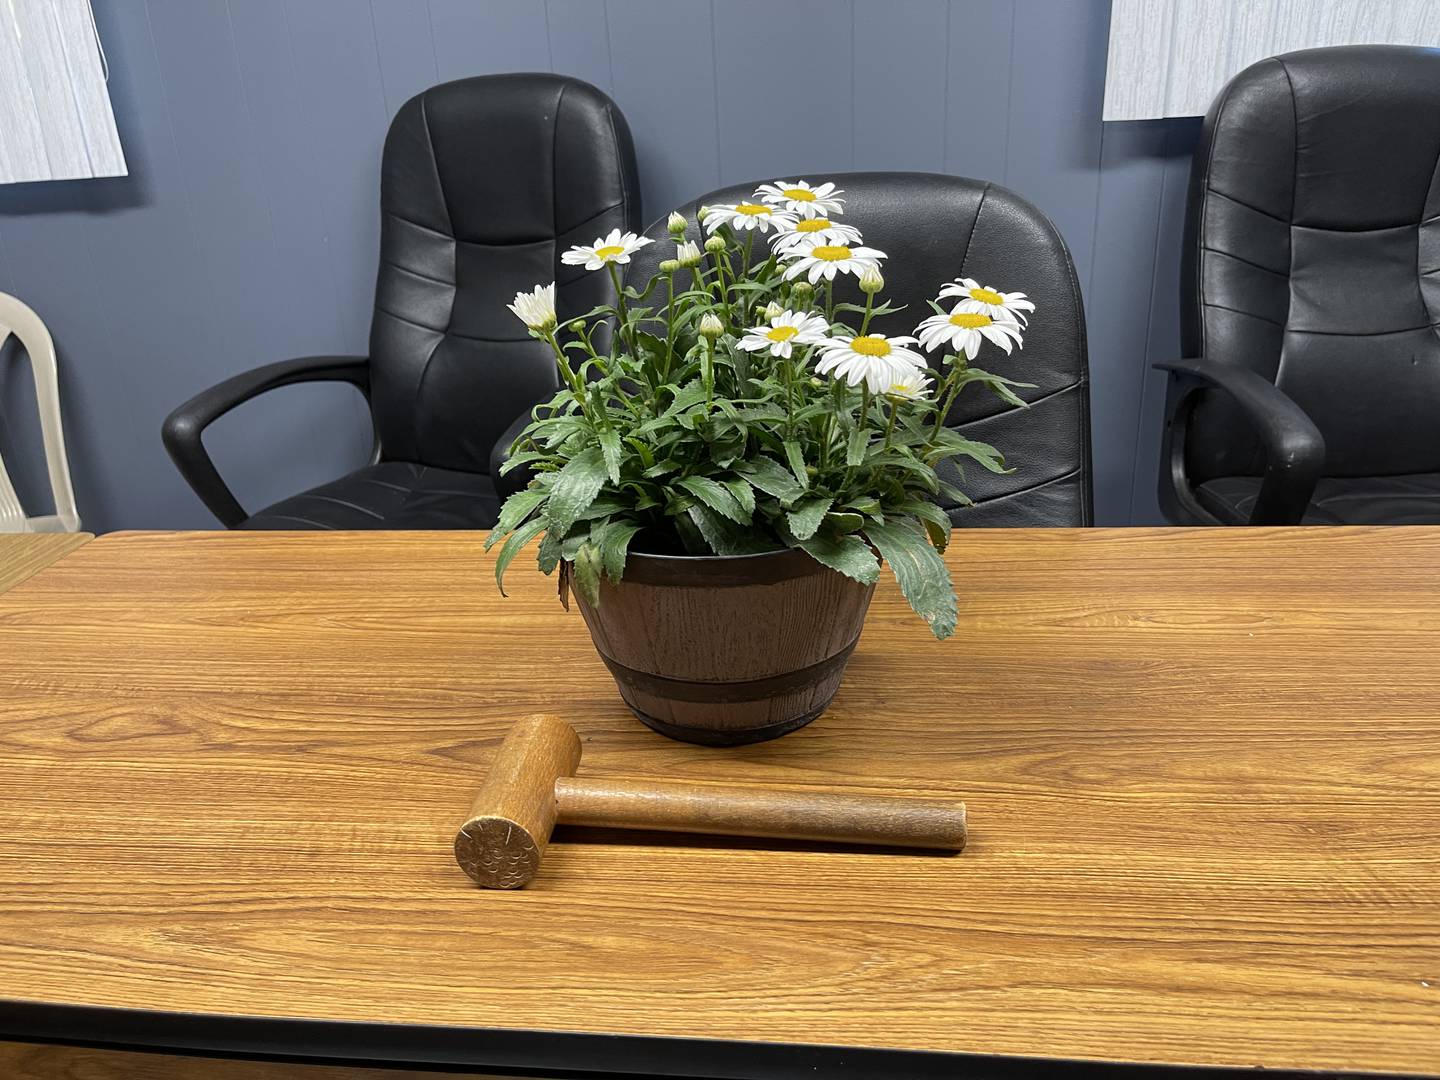 A pot of flowers with the meeting's gavel is laid in front the seat of former Holiday Hills Village President Lou French on Wednesday, Aug. 3, 2022. French died earlier this week, prompting the village to hold a special meeting to both honor him and fill his vacancy.